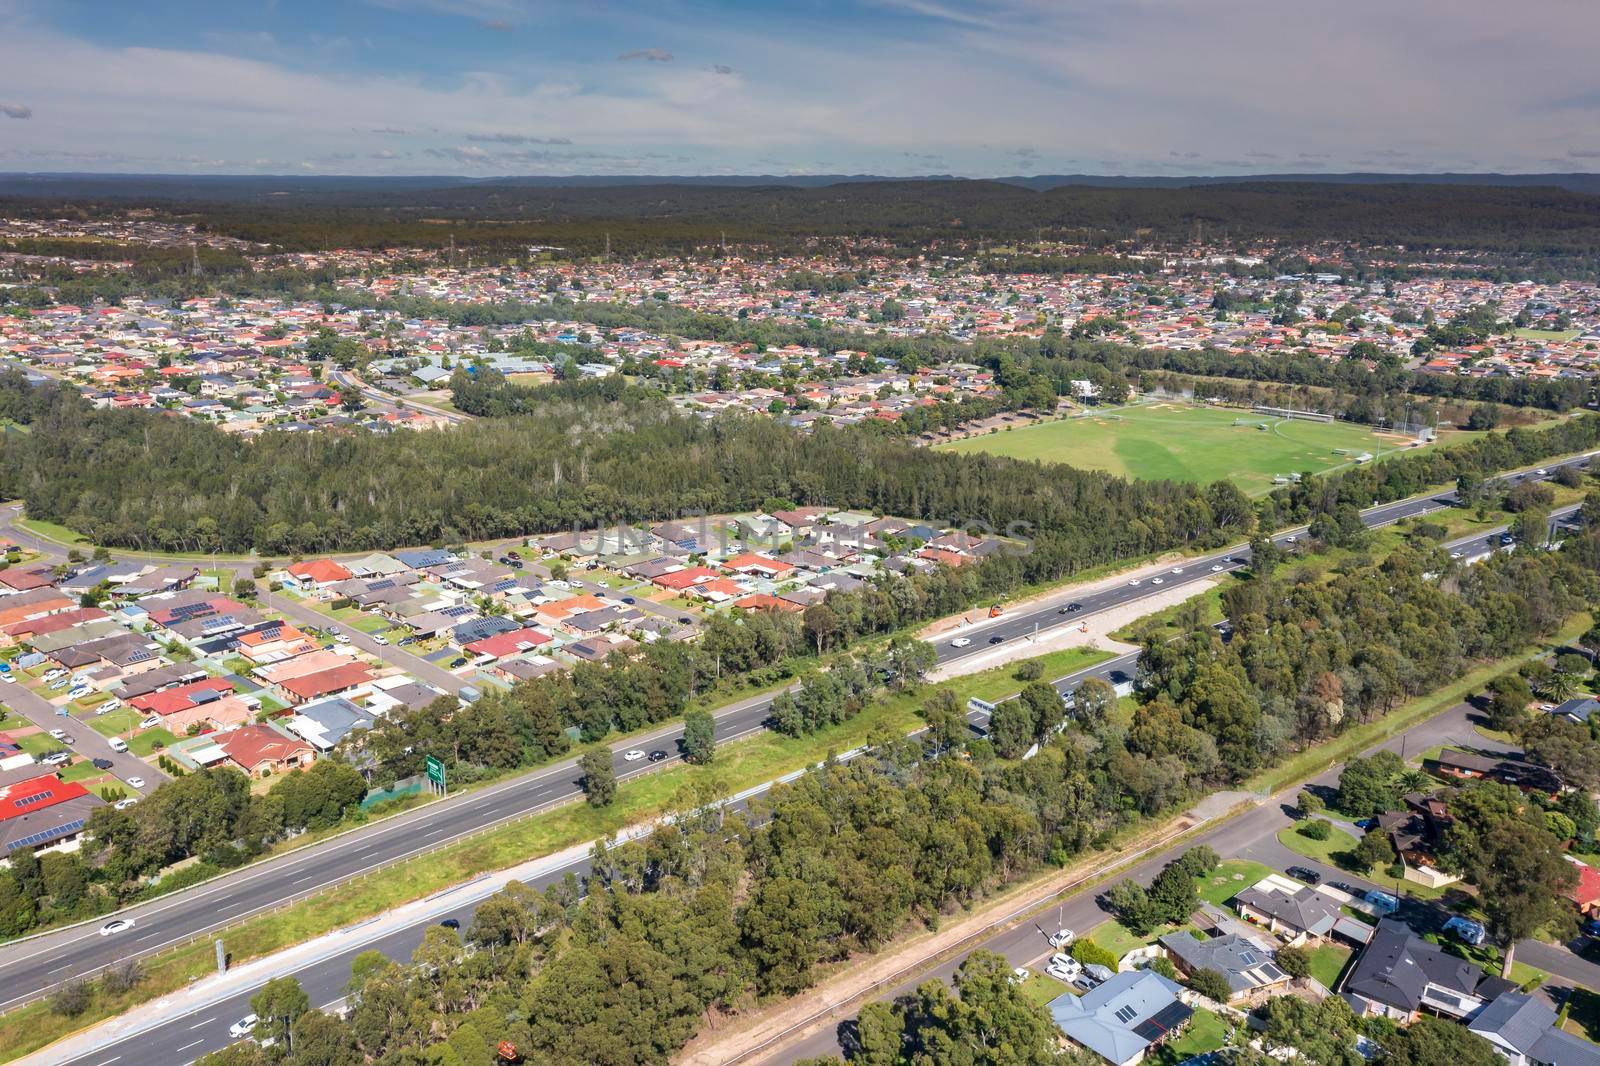 Aerial view of residential houses in the suburb of South Penrith in greater Sydney in New South Wales in Australia